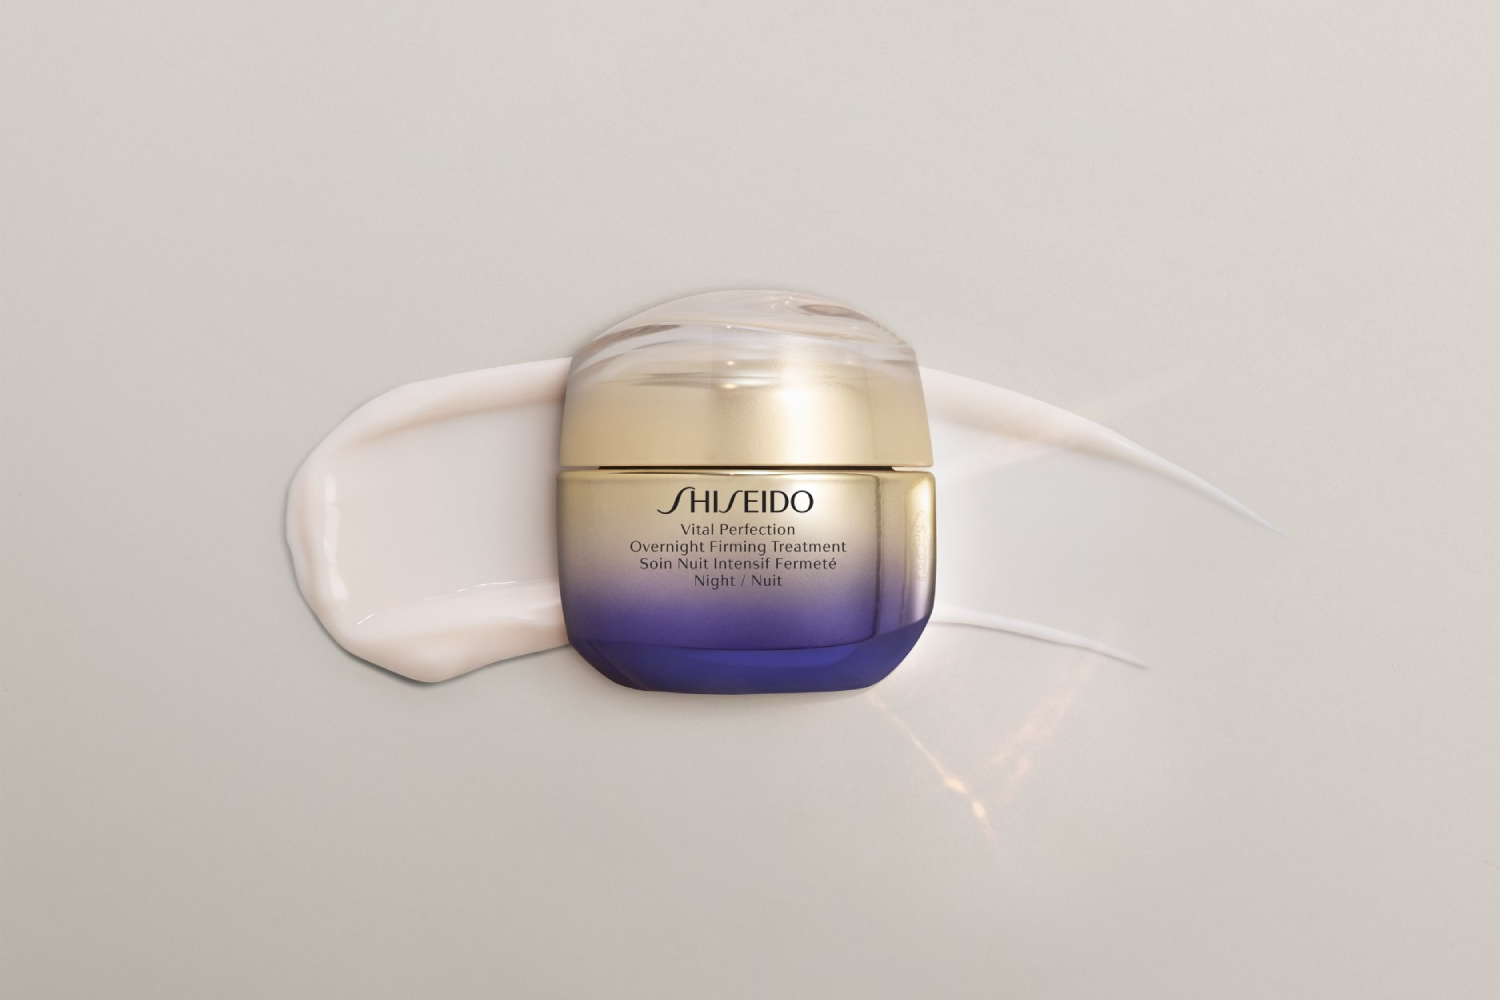 The Best Shiseido Products Worth Trying in 2023